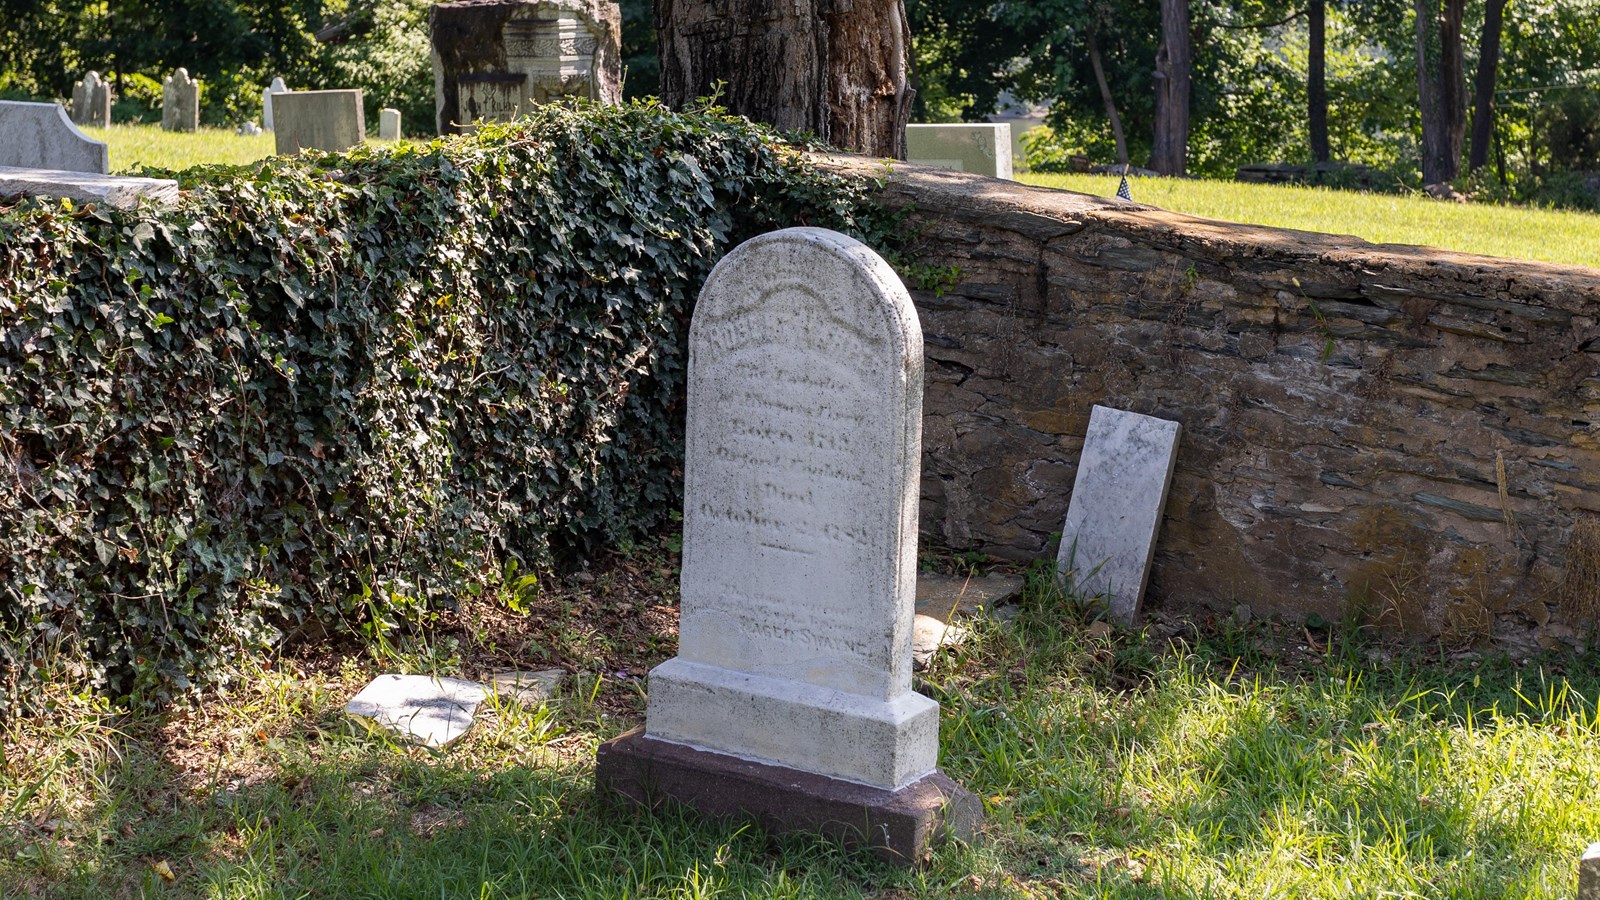 A headstone stands at the corner of an enclosure surrounded by a stone wall, underneath a tree.